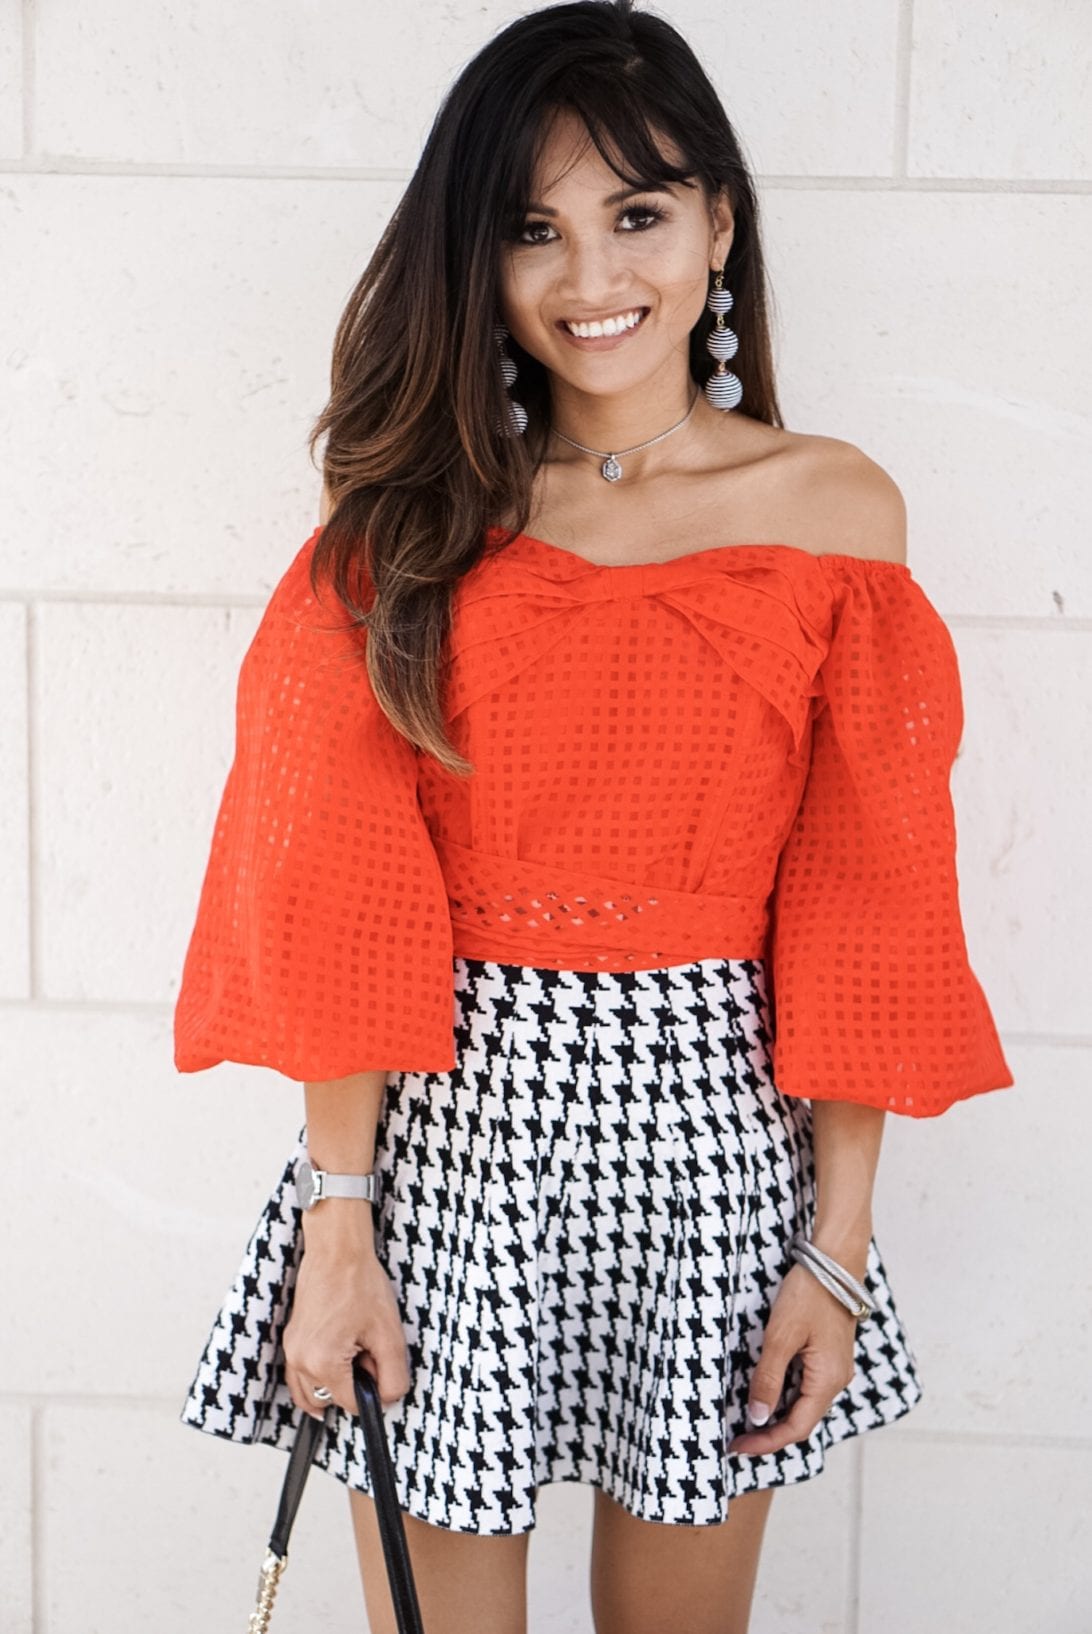 houndstooth skirt, mini skirt, red off the shoulder top, drop ball earrings